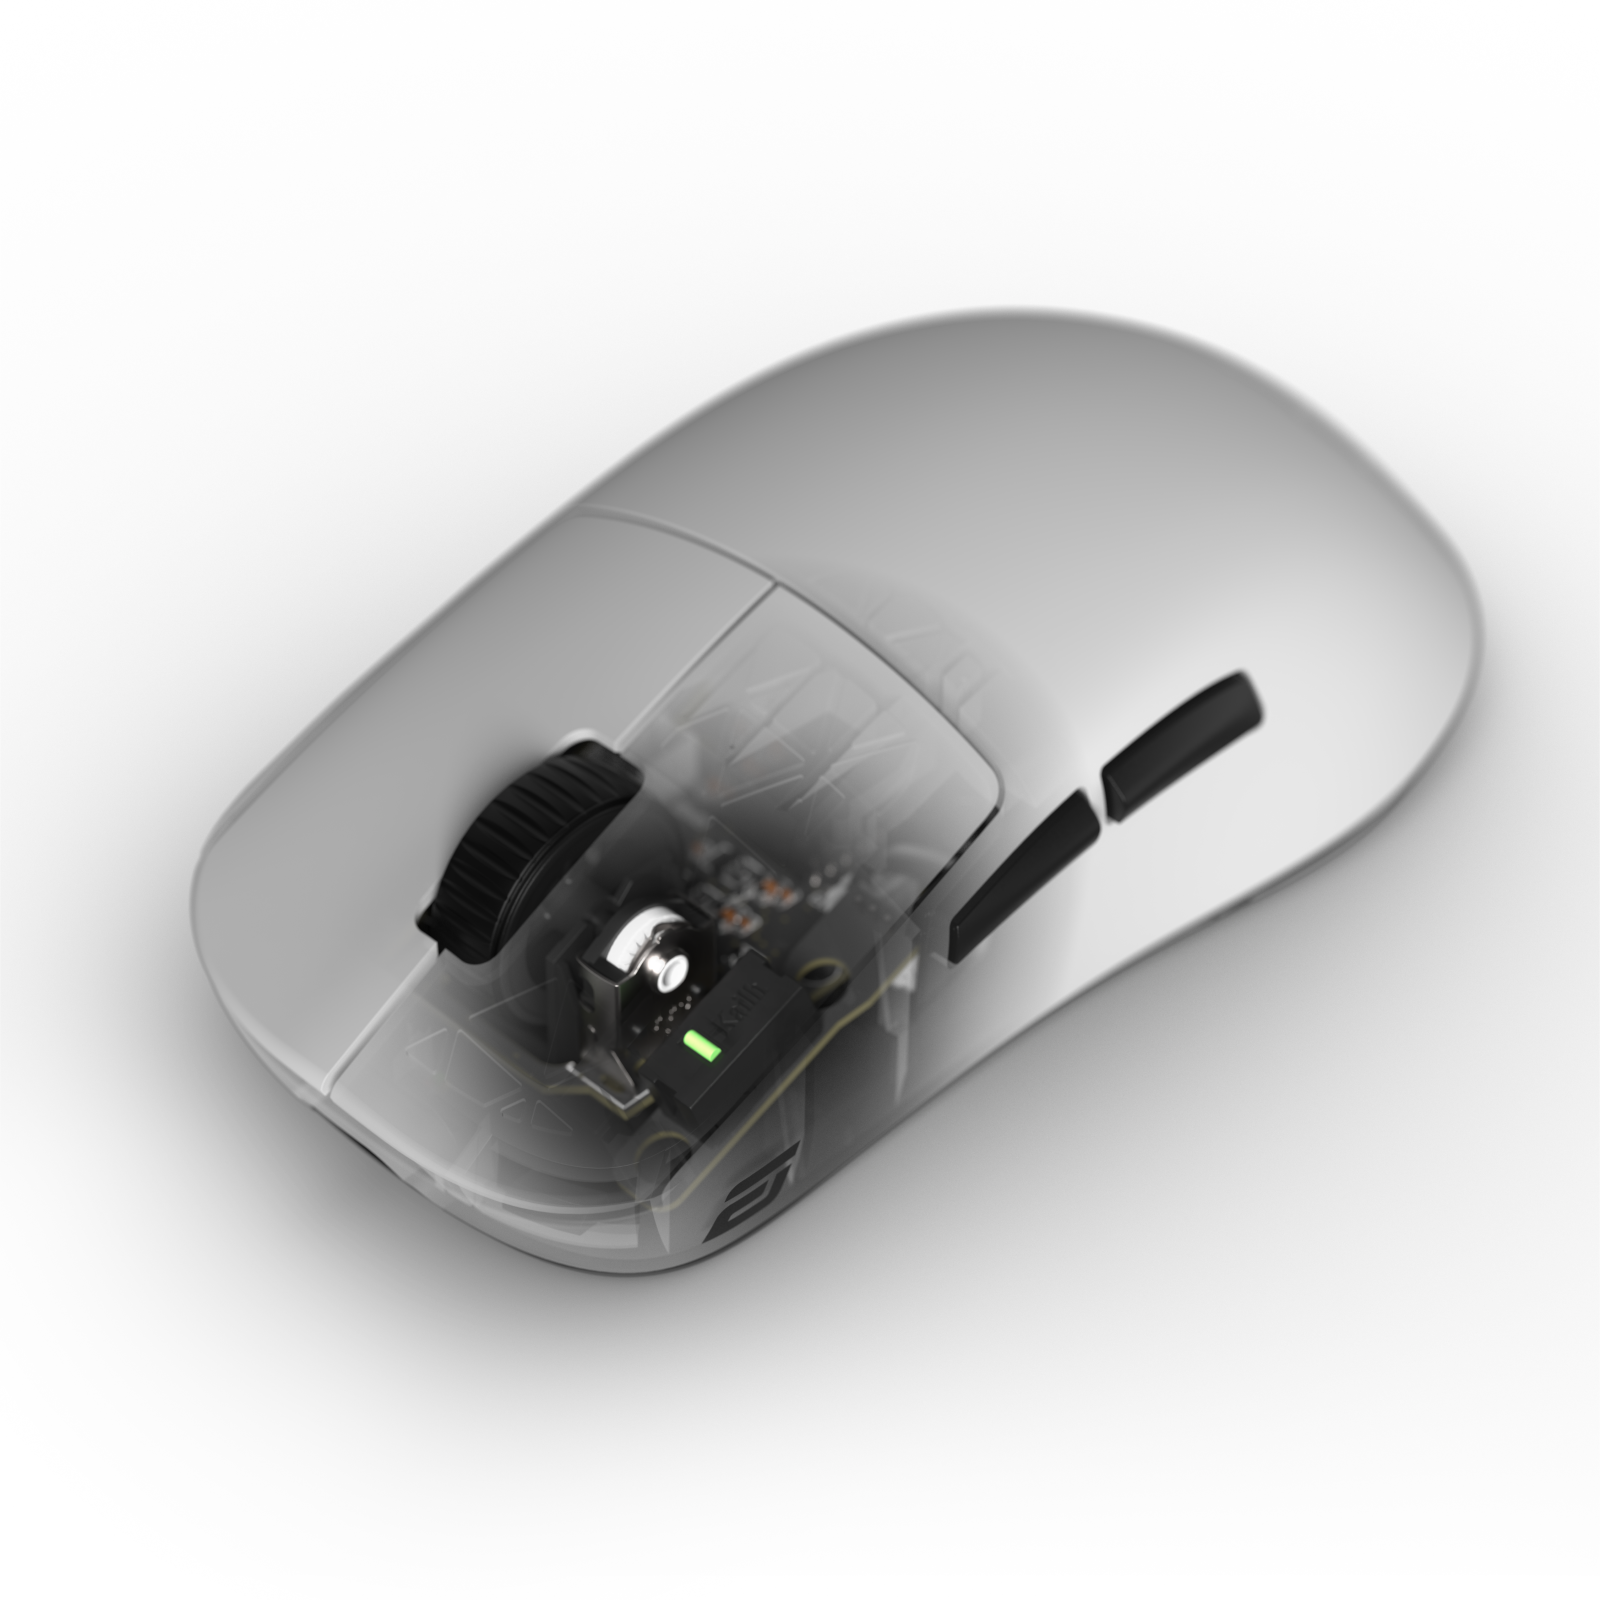 Endgame Gear OP1we Wireless Gaming Mouse White